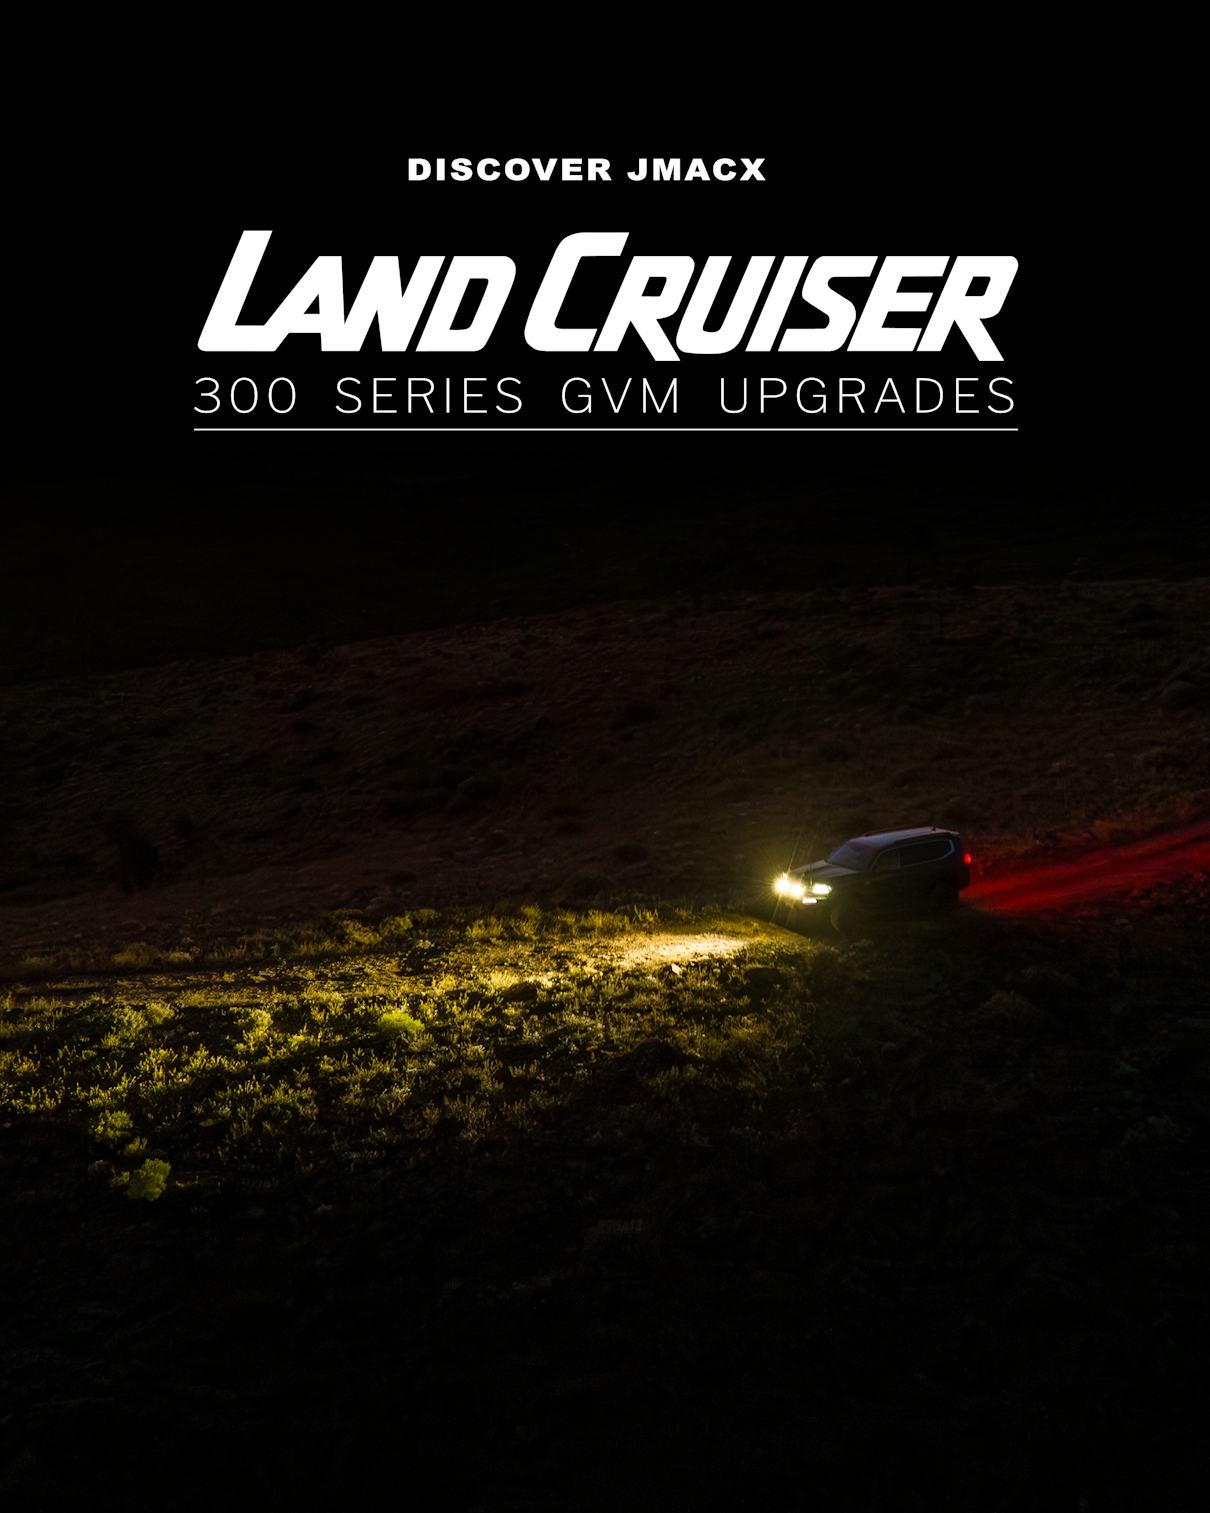 Landcruiser driving offroad at nighttime, with caption "Discover Jmacx Landcruiser 300 Series GVM Upgrades"